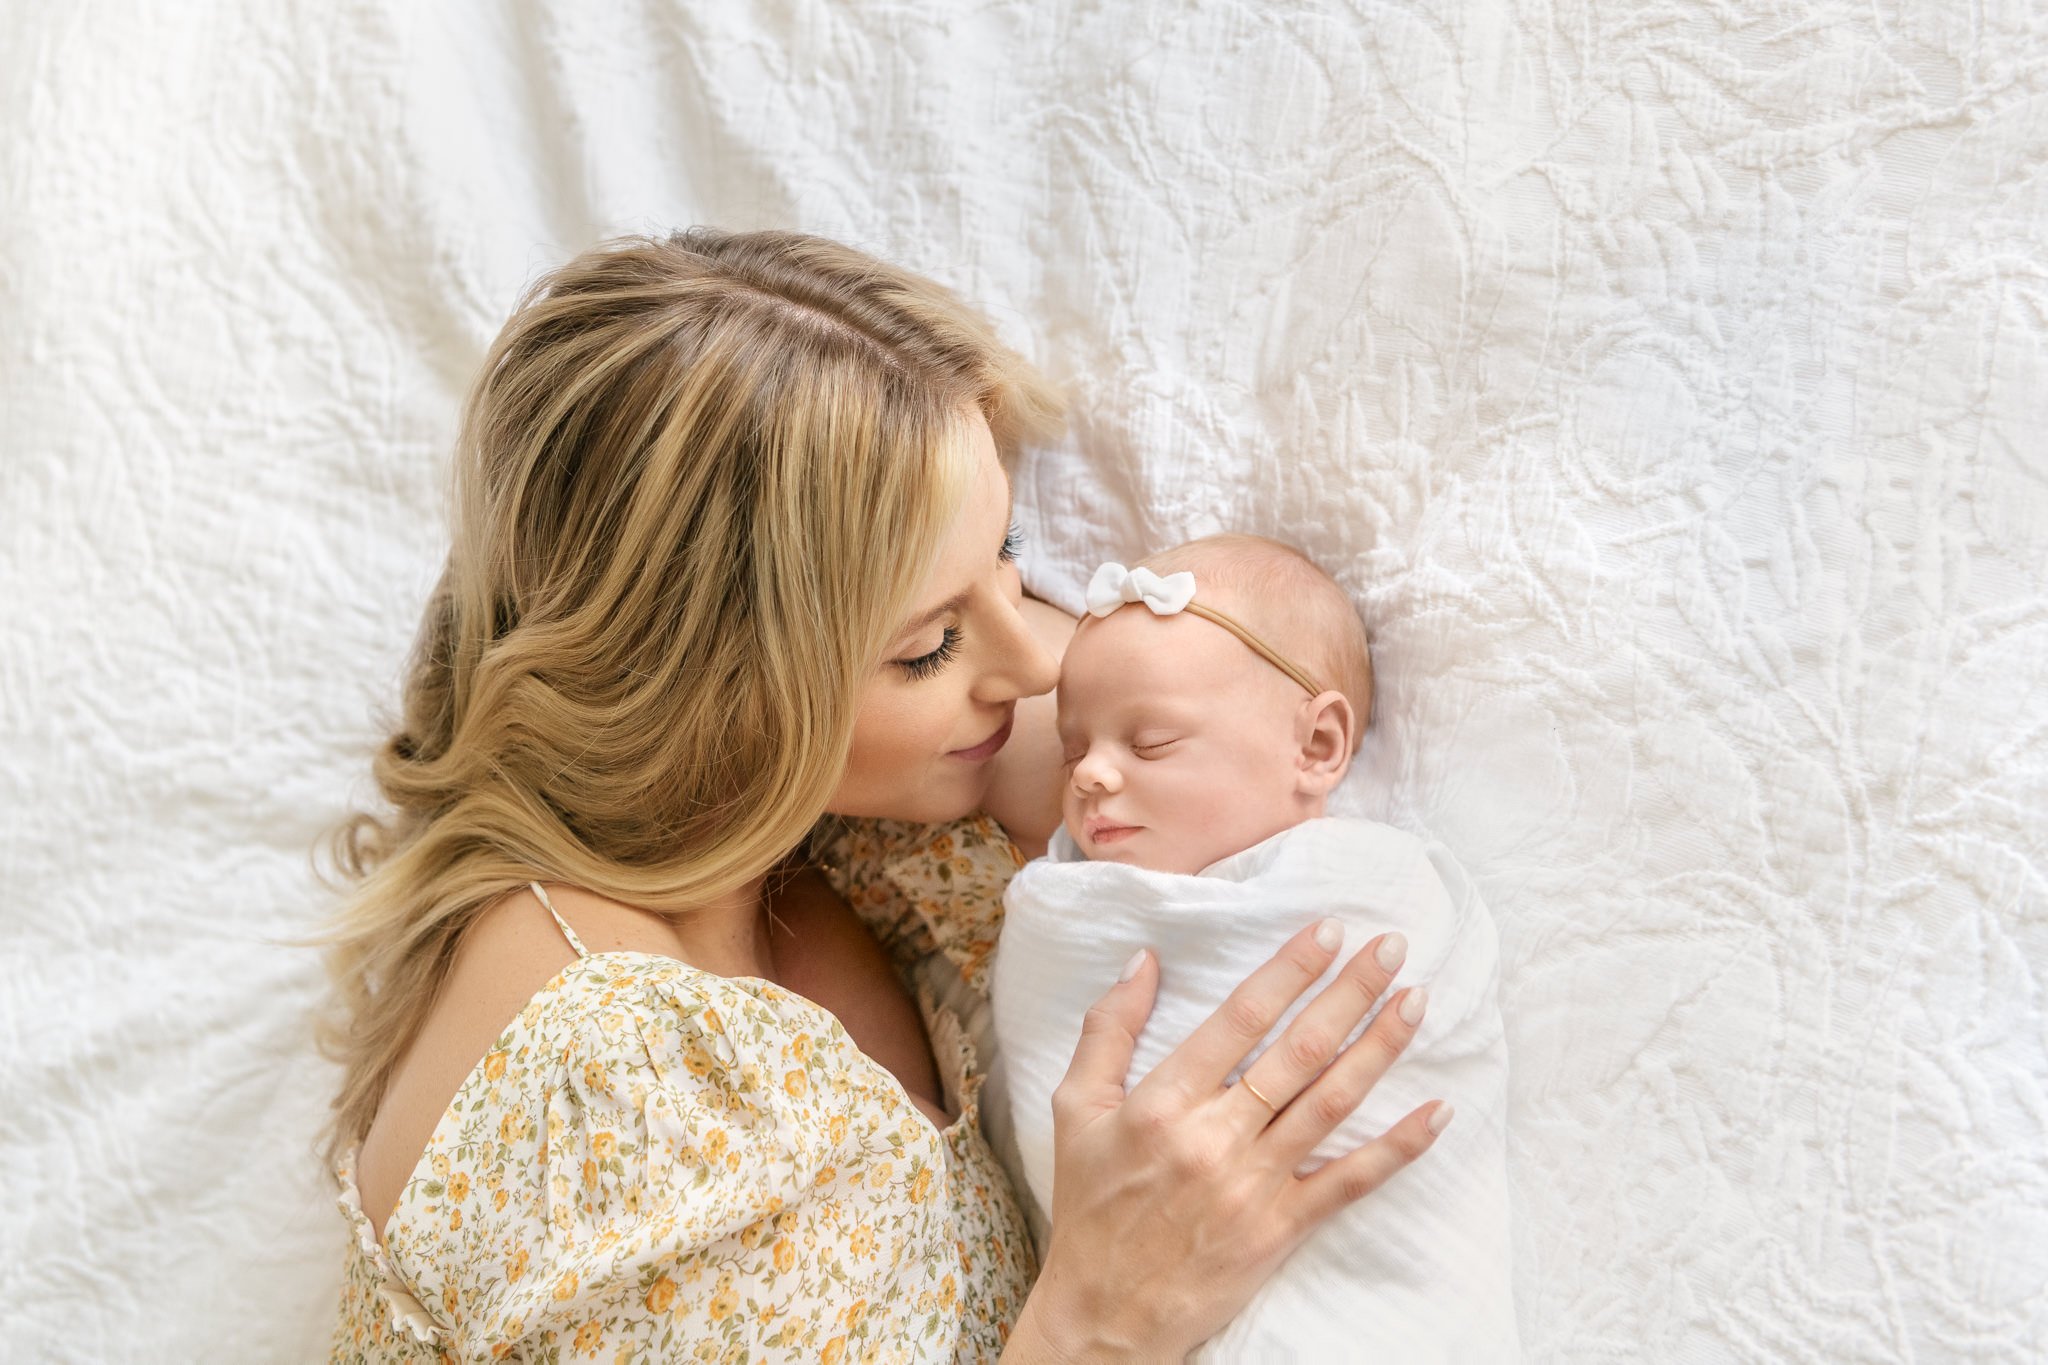  Intimate motherhood photography with mother and baby snuggling on bed by Nicole Hawkins Photography. mother and baby on bed #NicoleHawkinsPhotography #NicoleHawkinsNewborns #InHomeNewborns #NewJerseyNewborns #NewYorkNewborns #babygirlnewborns 